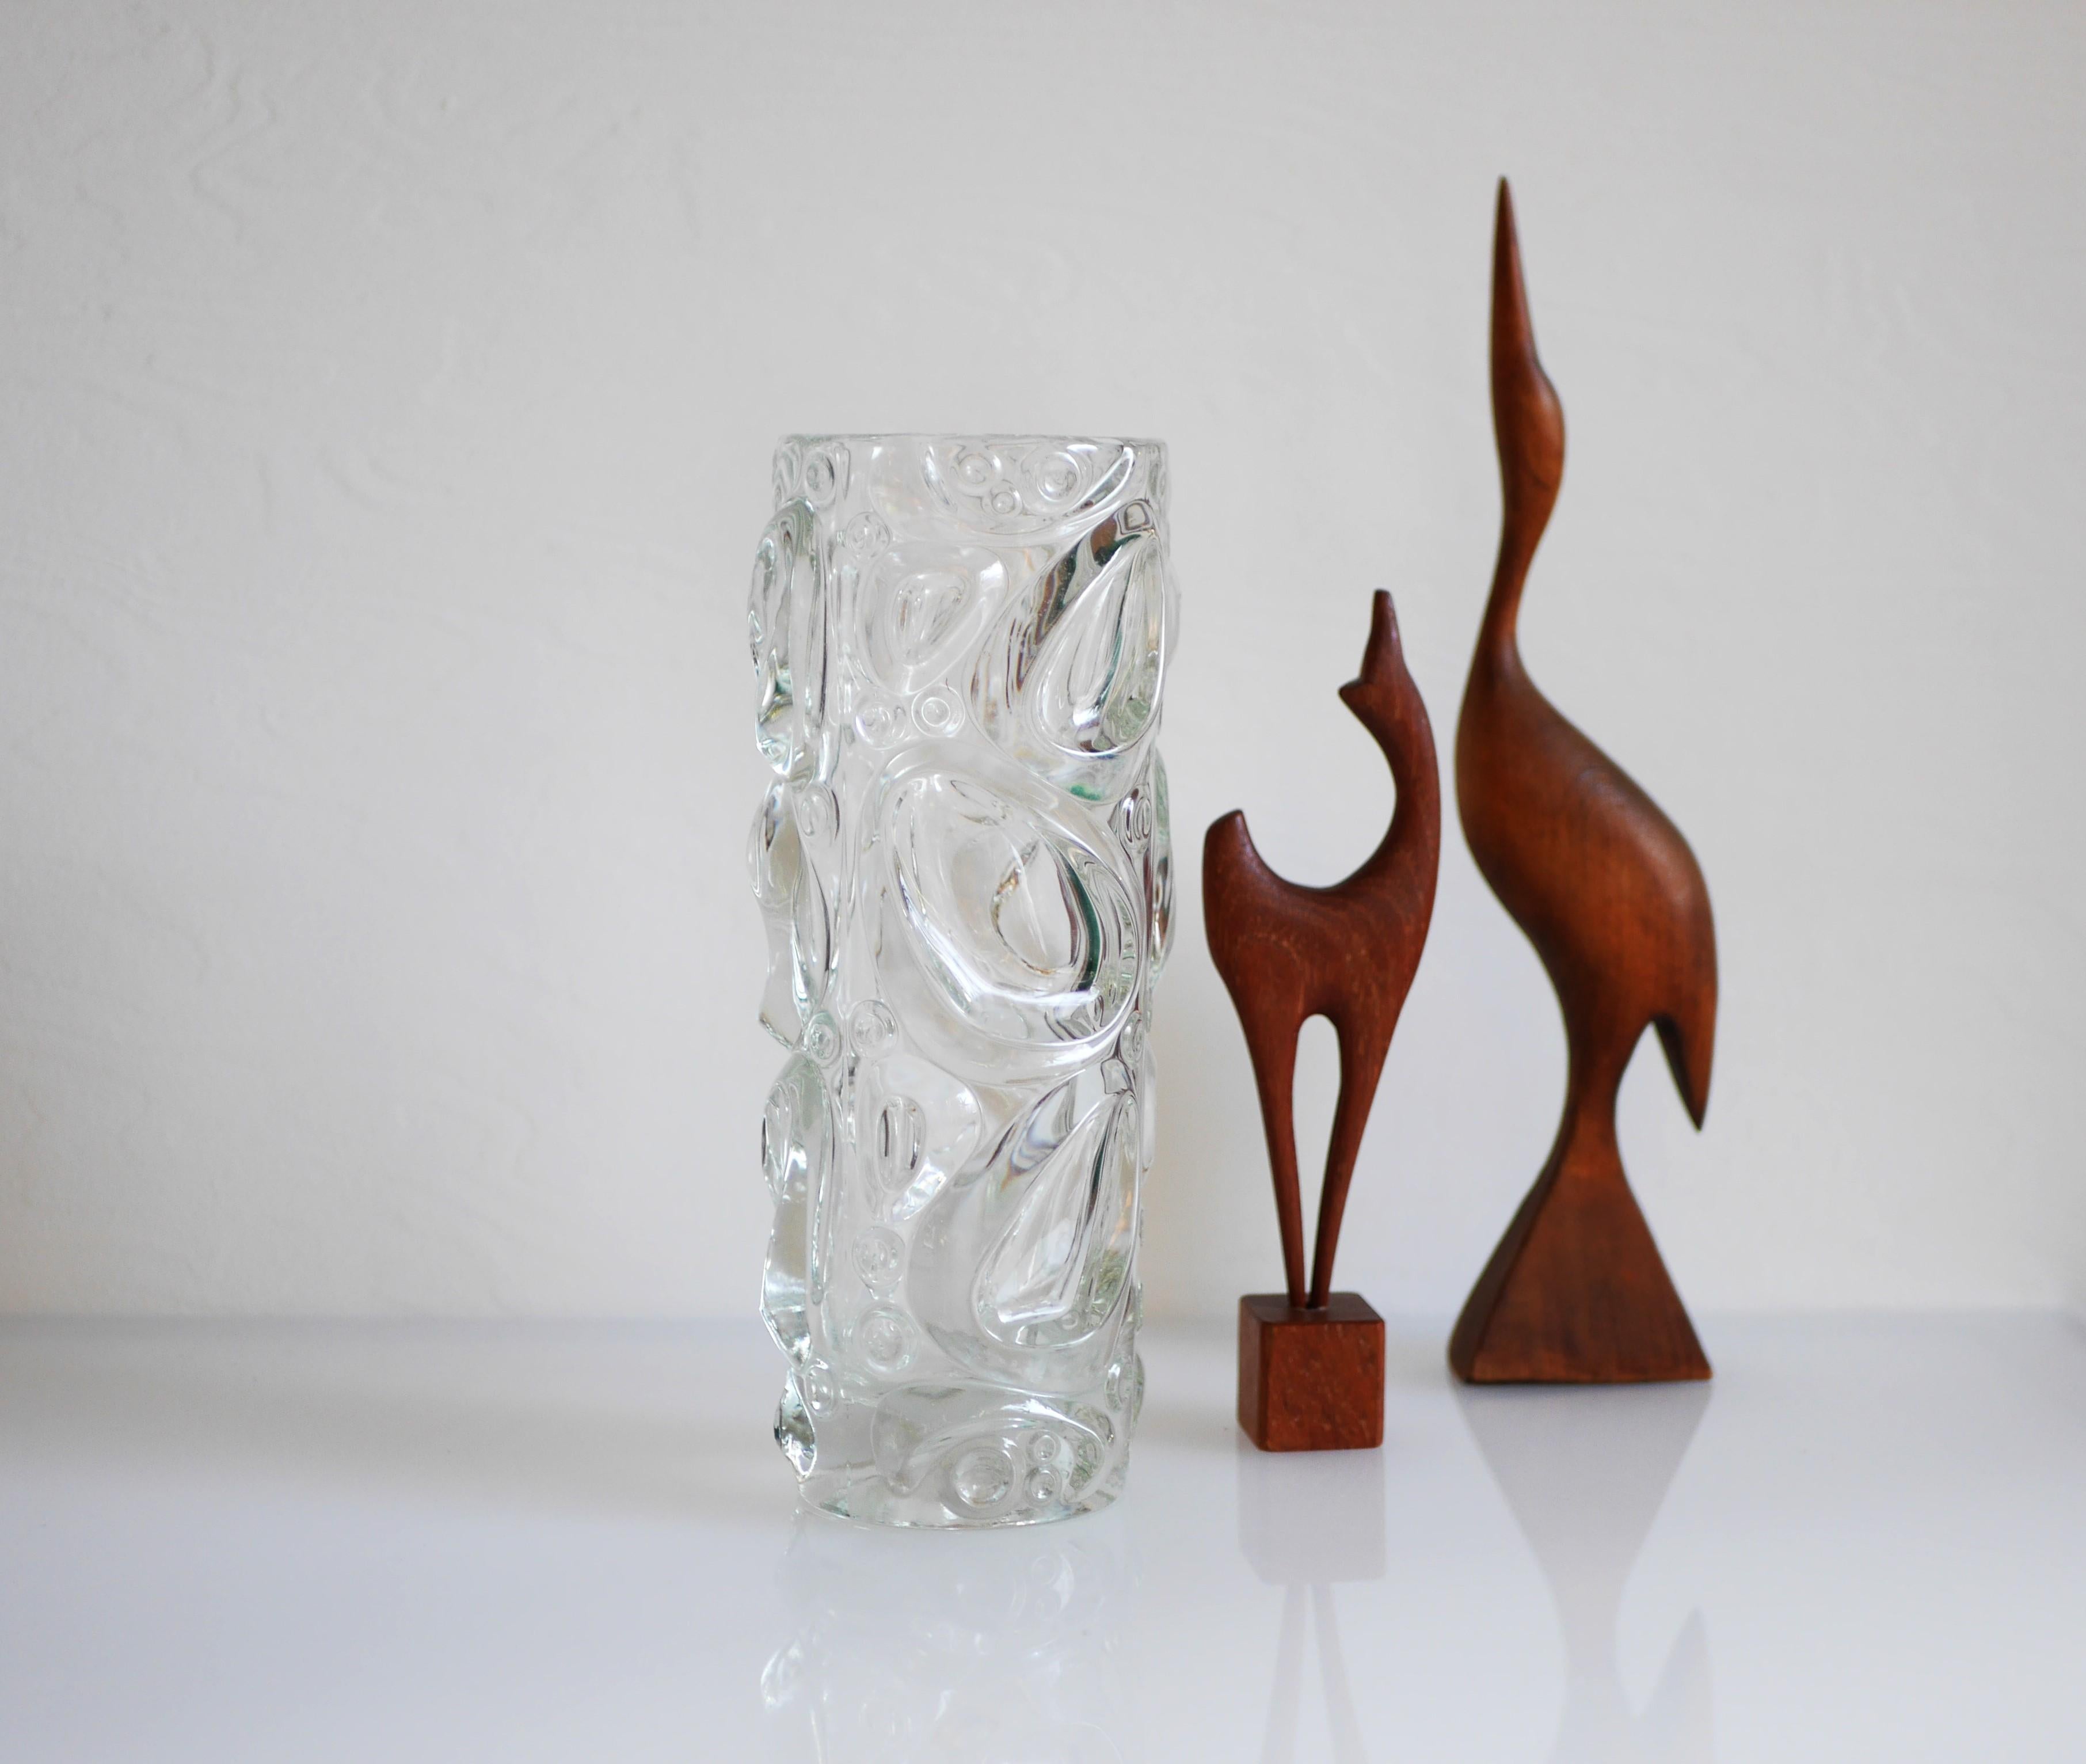 Mid-century modern Czech glass vase design by Frantisek Peceny, Rosice works for Sklo Union, 1972. A rather substantial and rare design glass vase from former Czechoslovakia. The design of this vase is very organic in its shapes, which makes it into